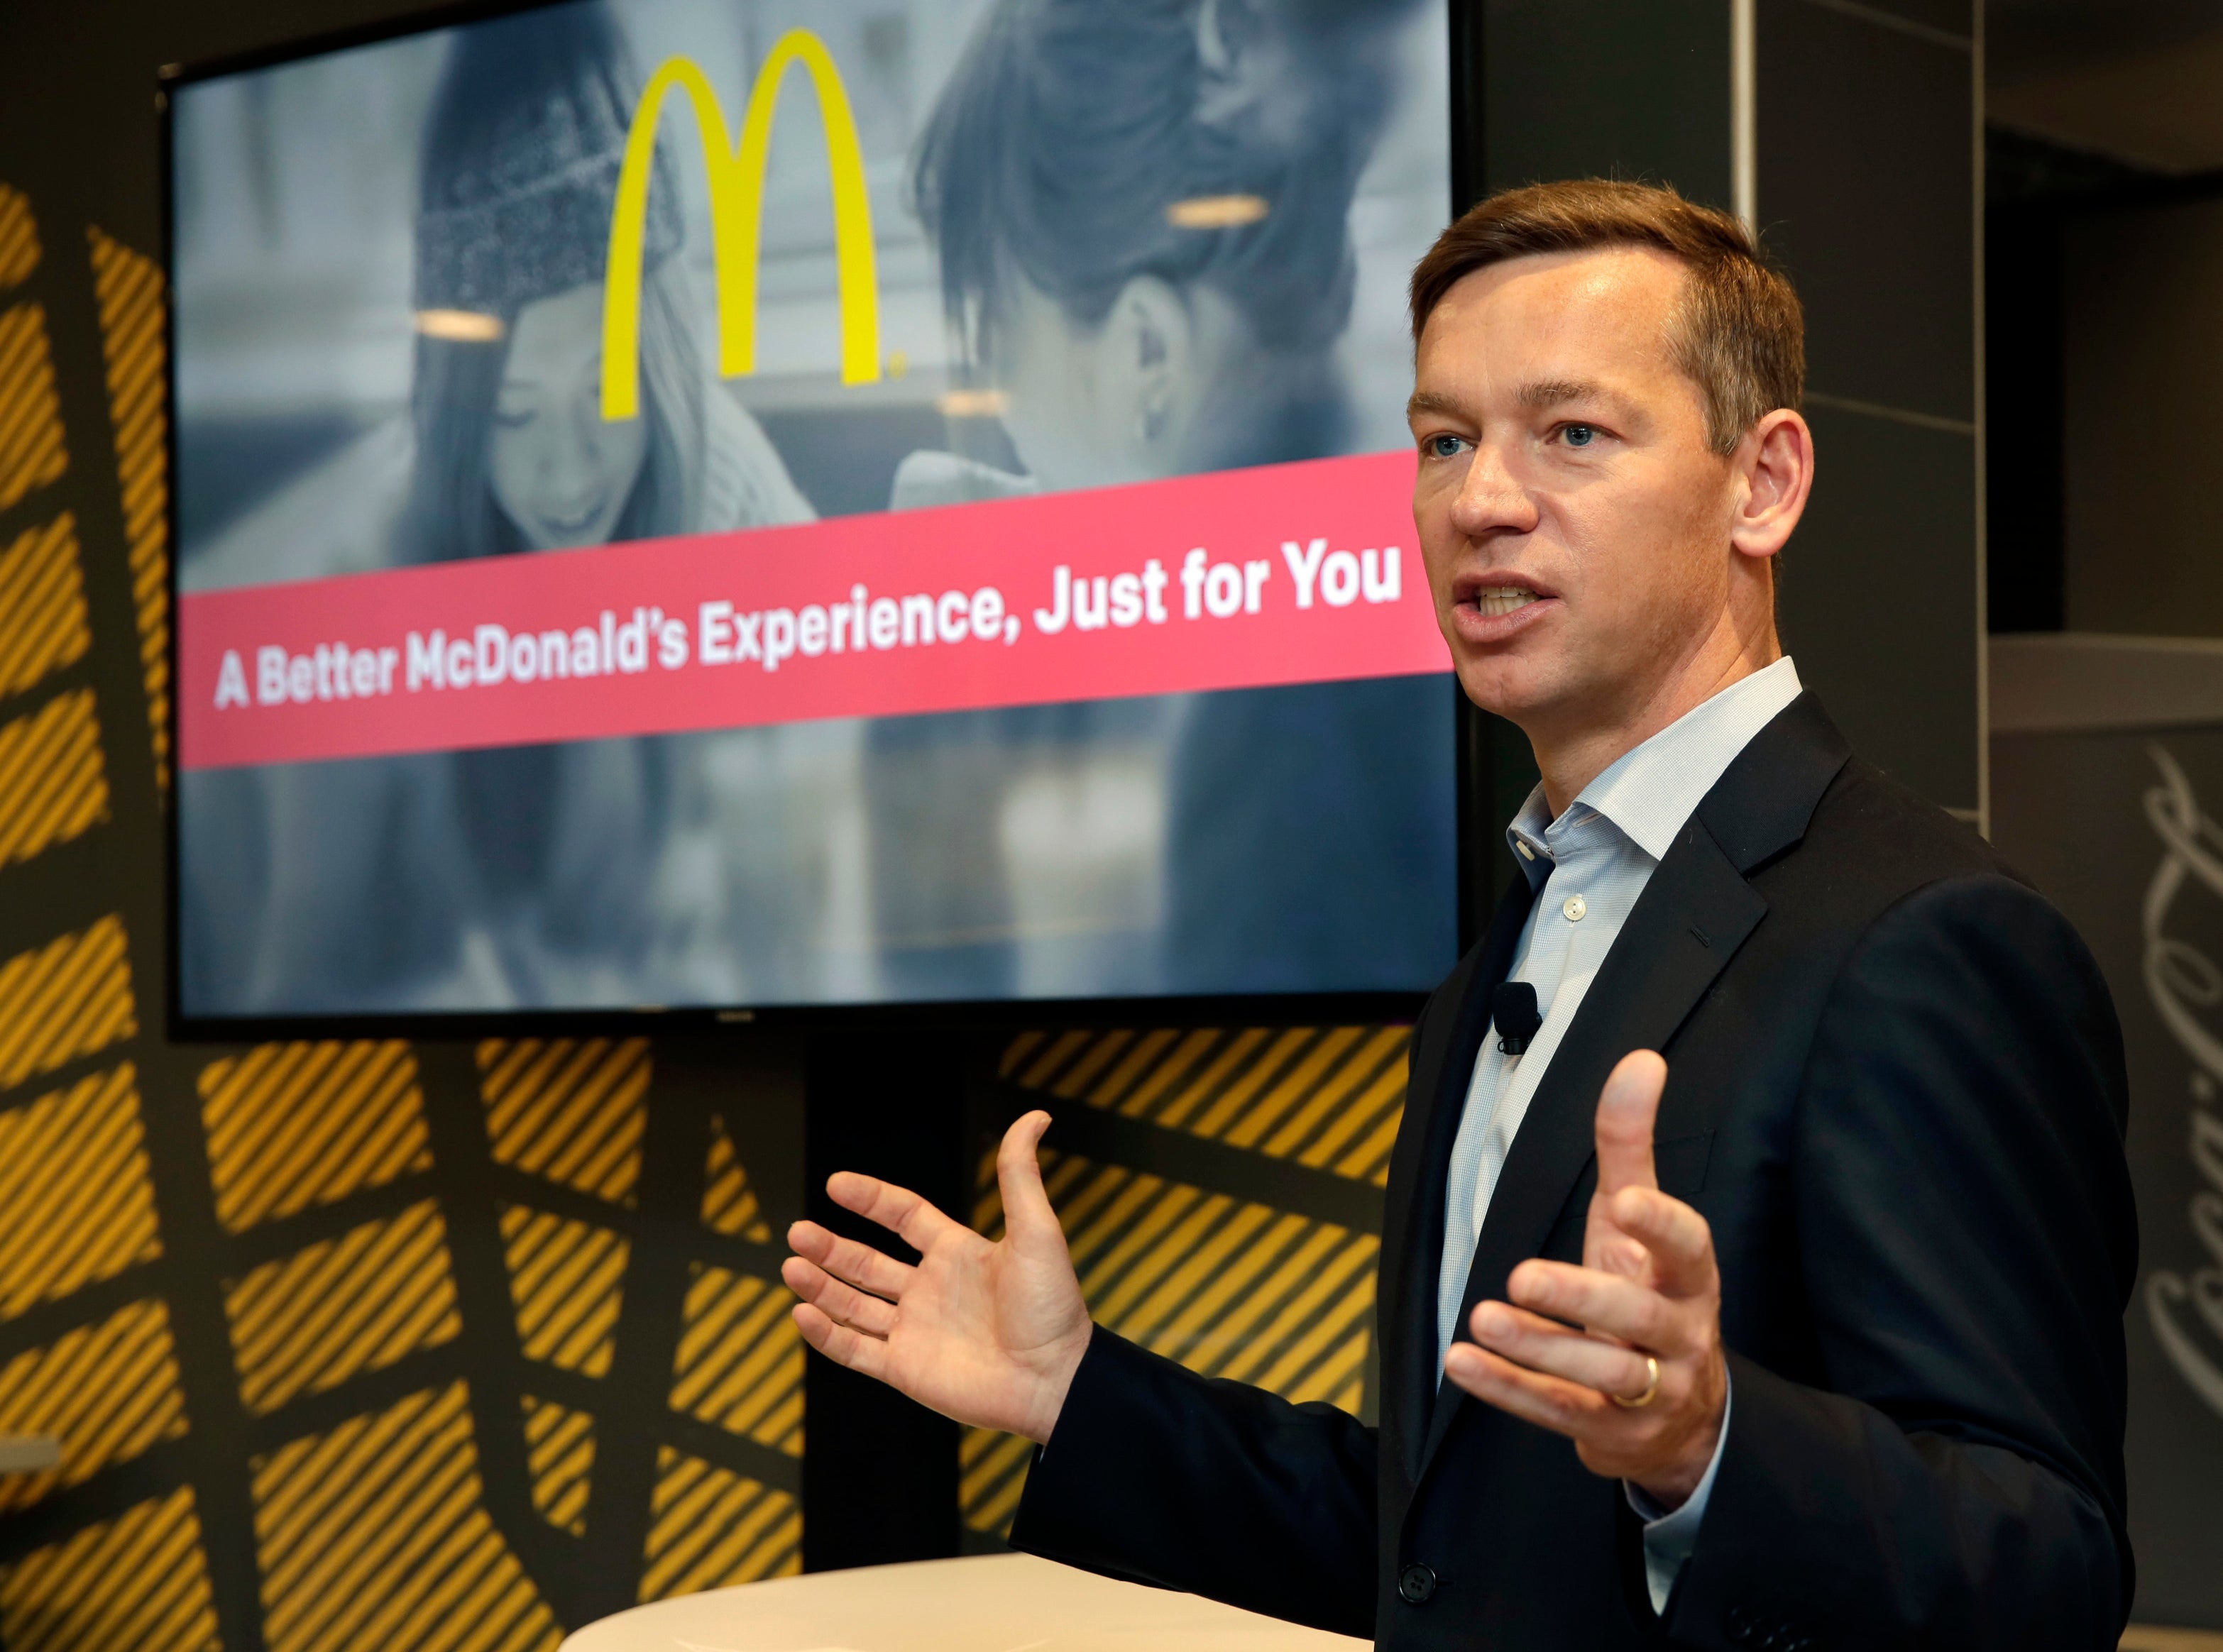 McDonald’s CEO is under fire for blaming the parents for the deaths of two murder victims. Employees claim it reflects the racist ecosystem in McDonald’s